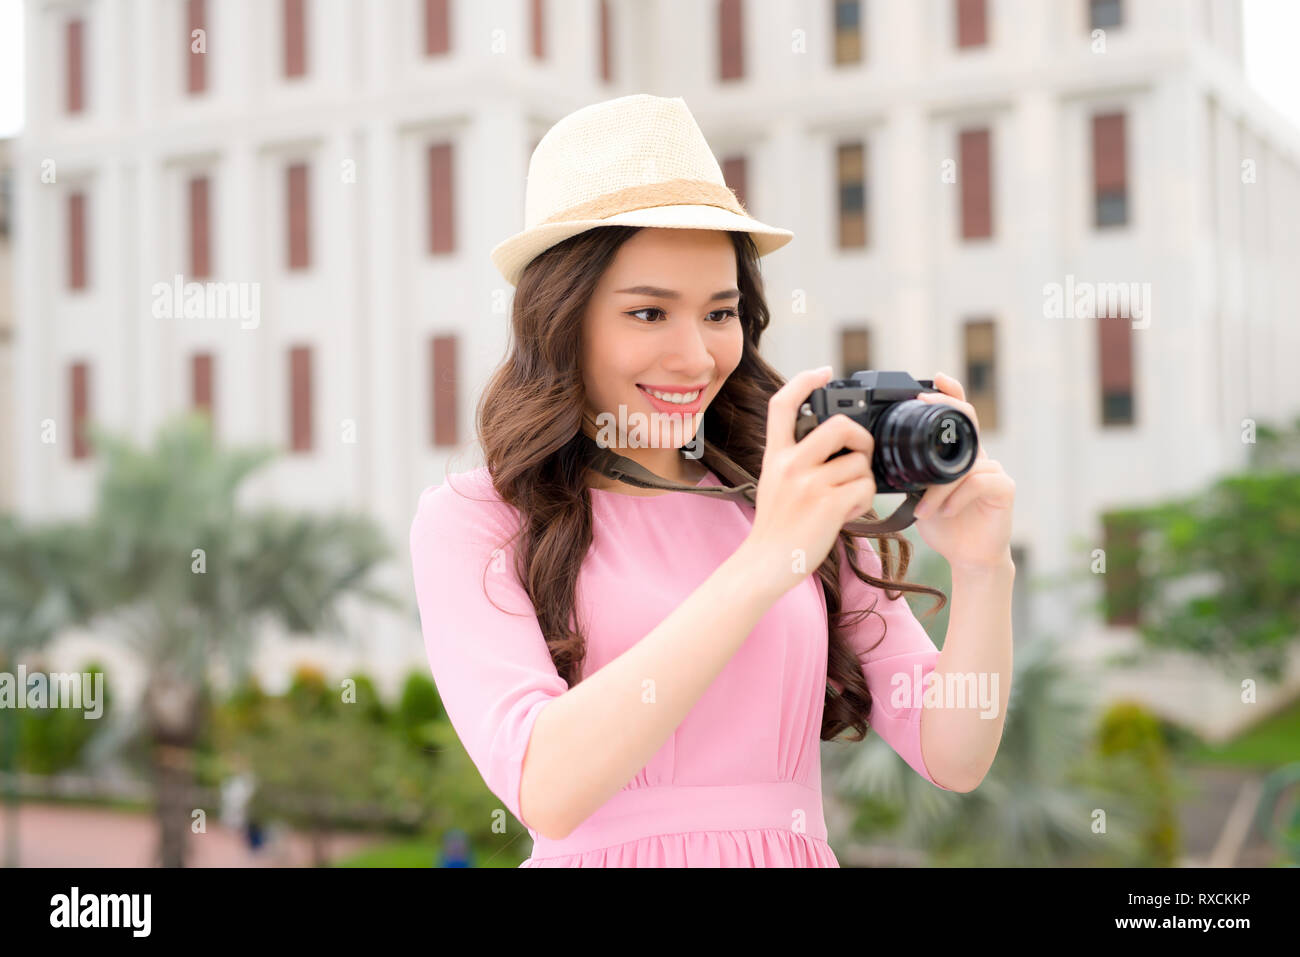 Outdoor summer smiling lifestyle portrait of pretty young woman having fun in the city in Asian with camera travel photo of photographer Stock Photo